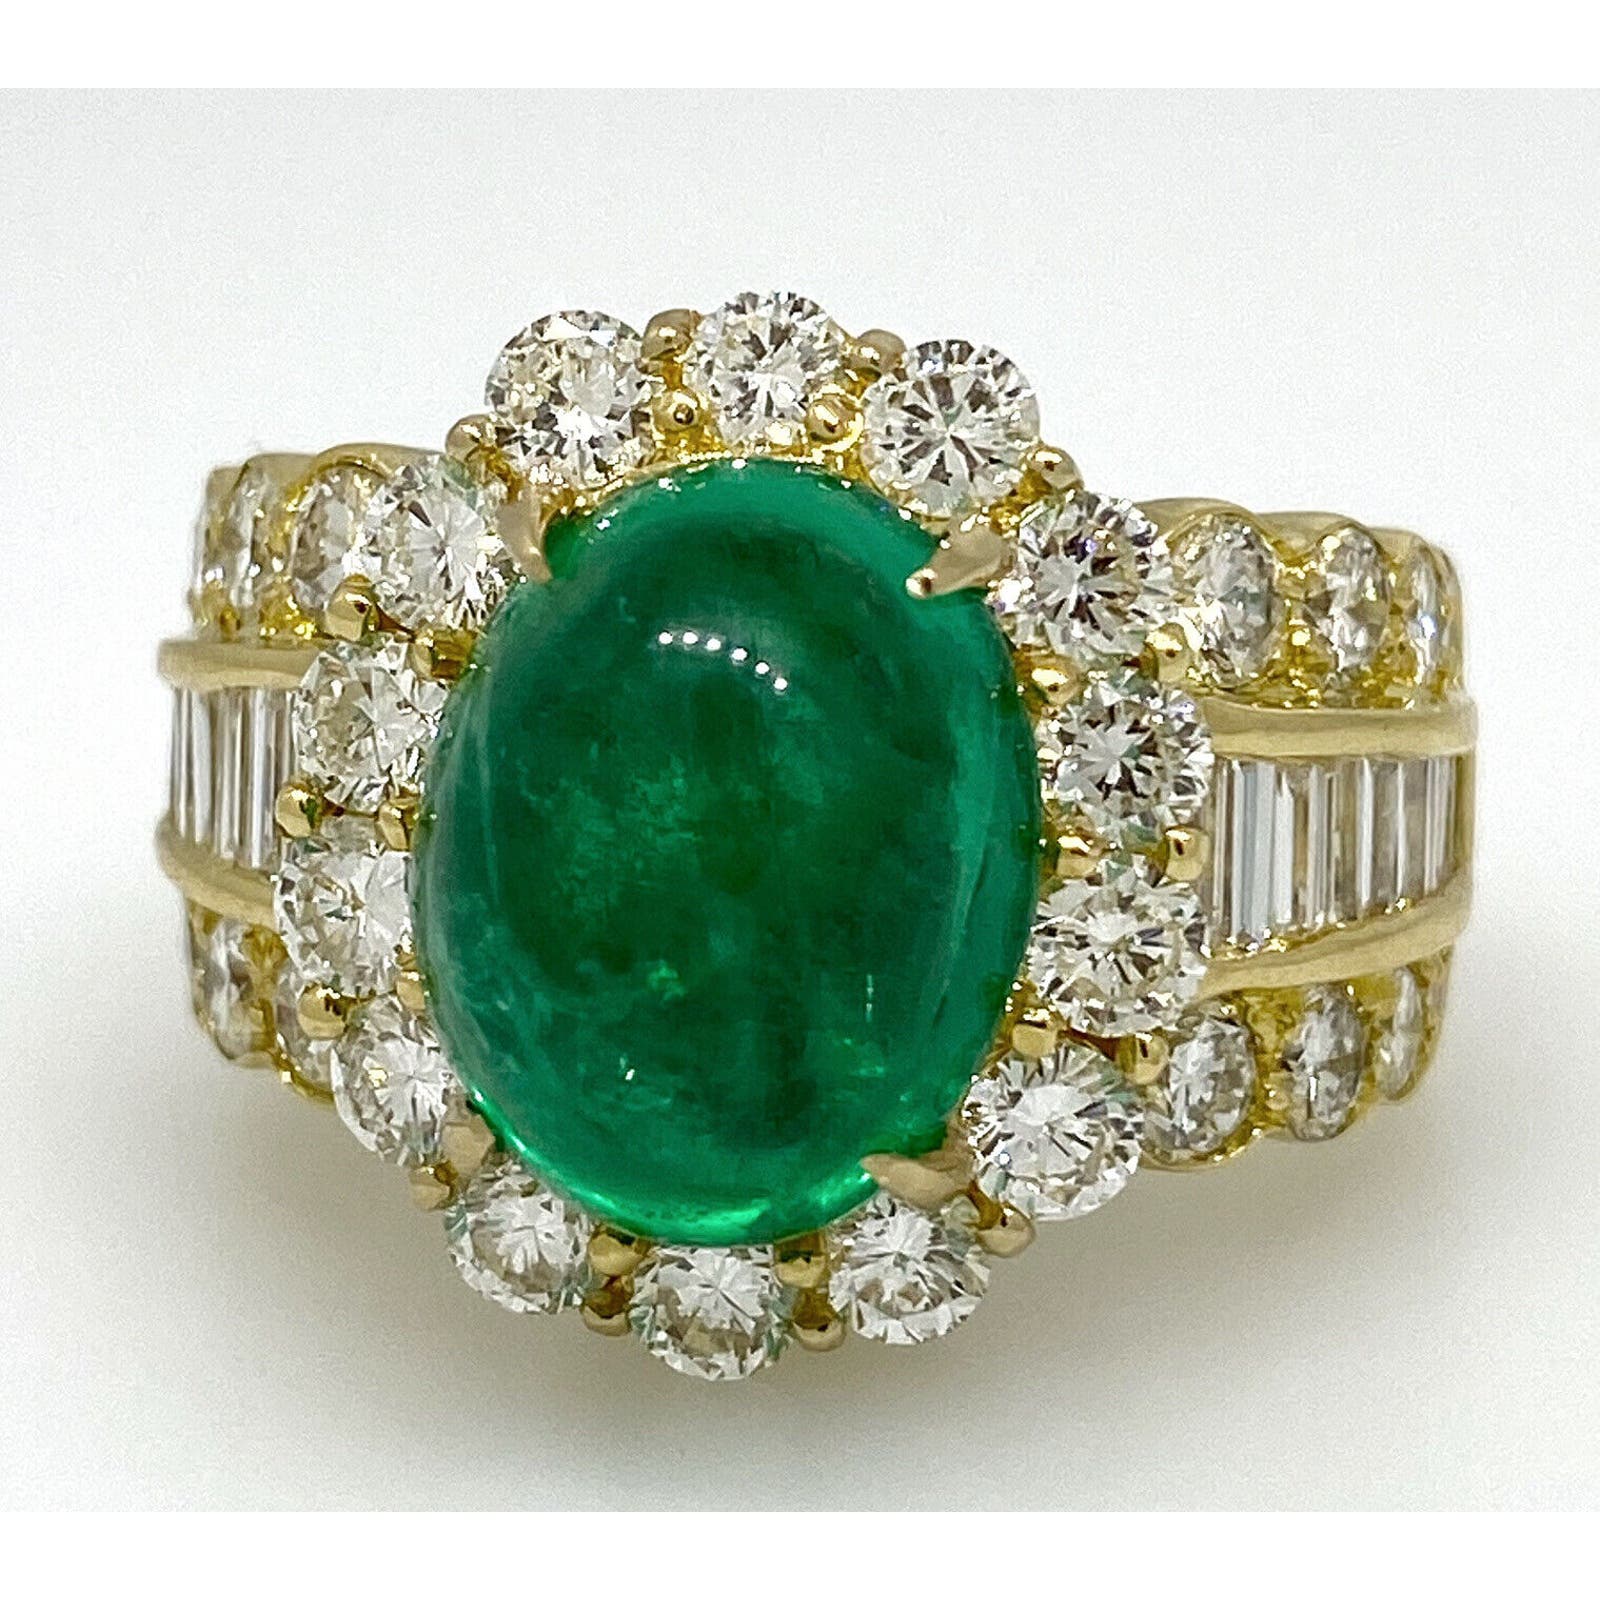 GIA 5.12ct Emerald Cabochon & Diamond Ring in 18k Yellow Gold - HM2222BR